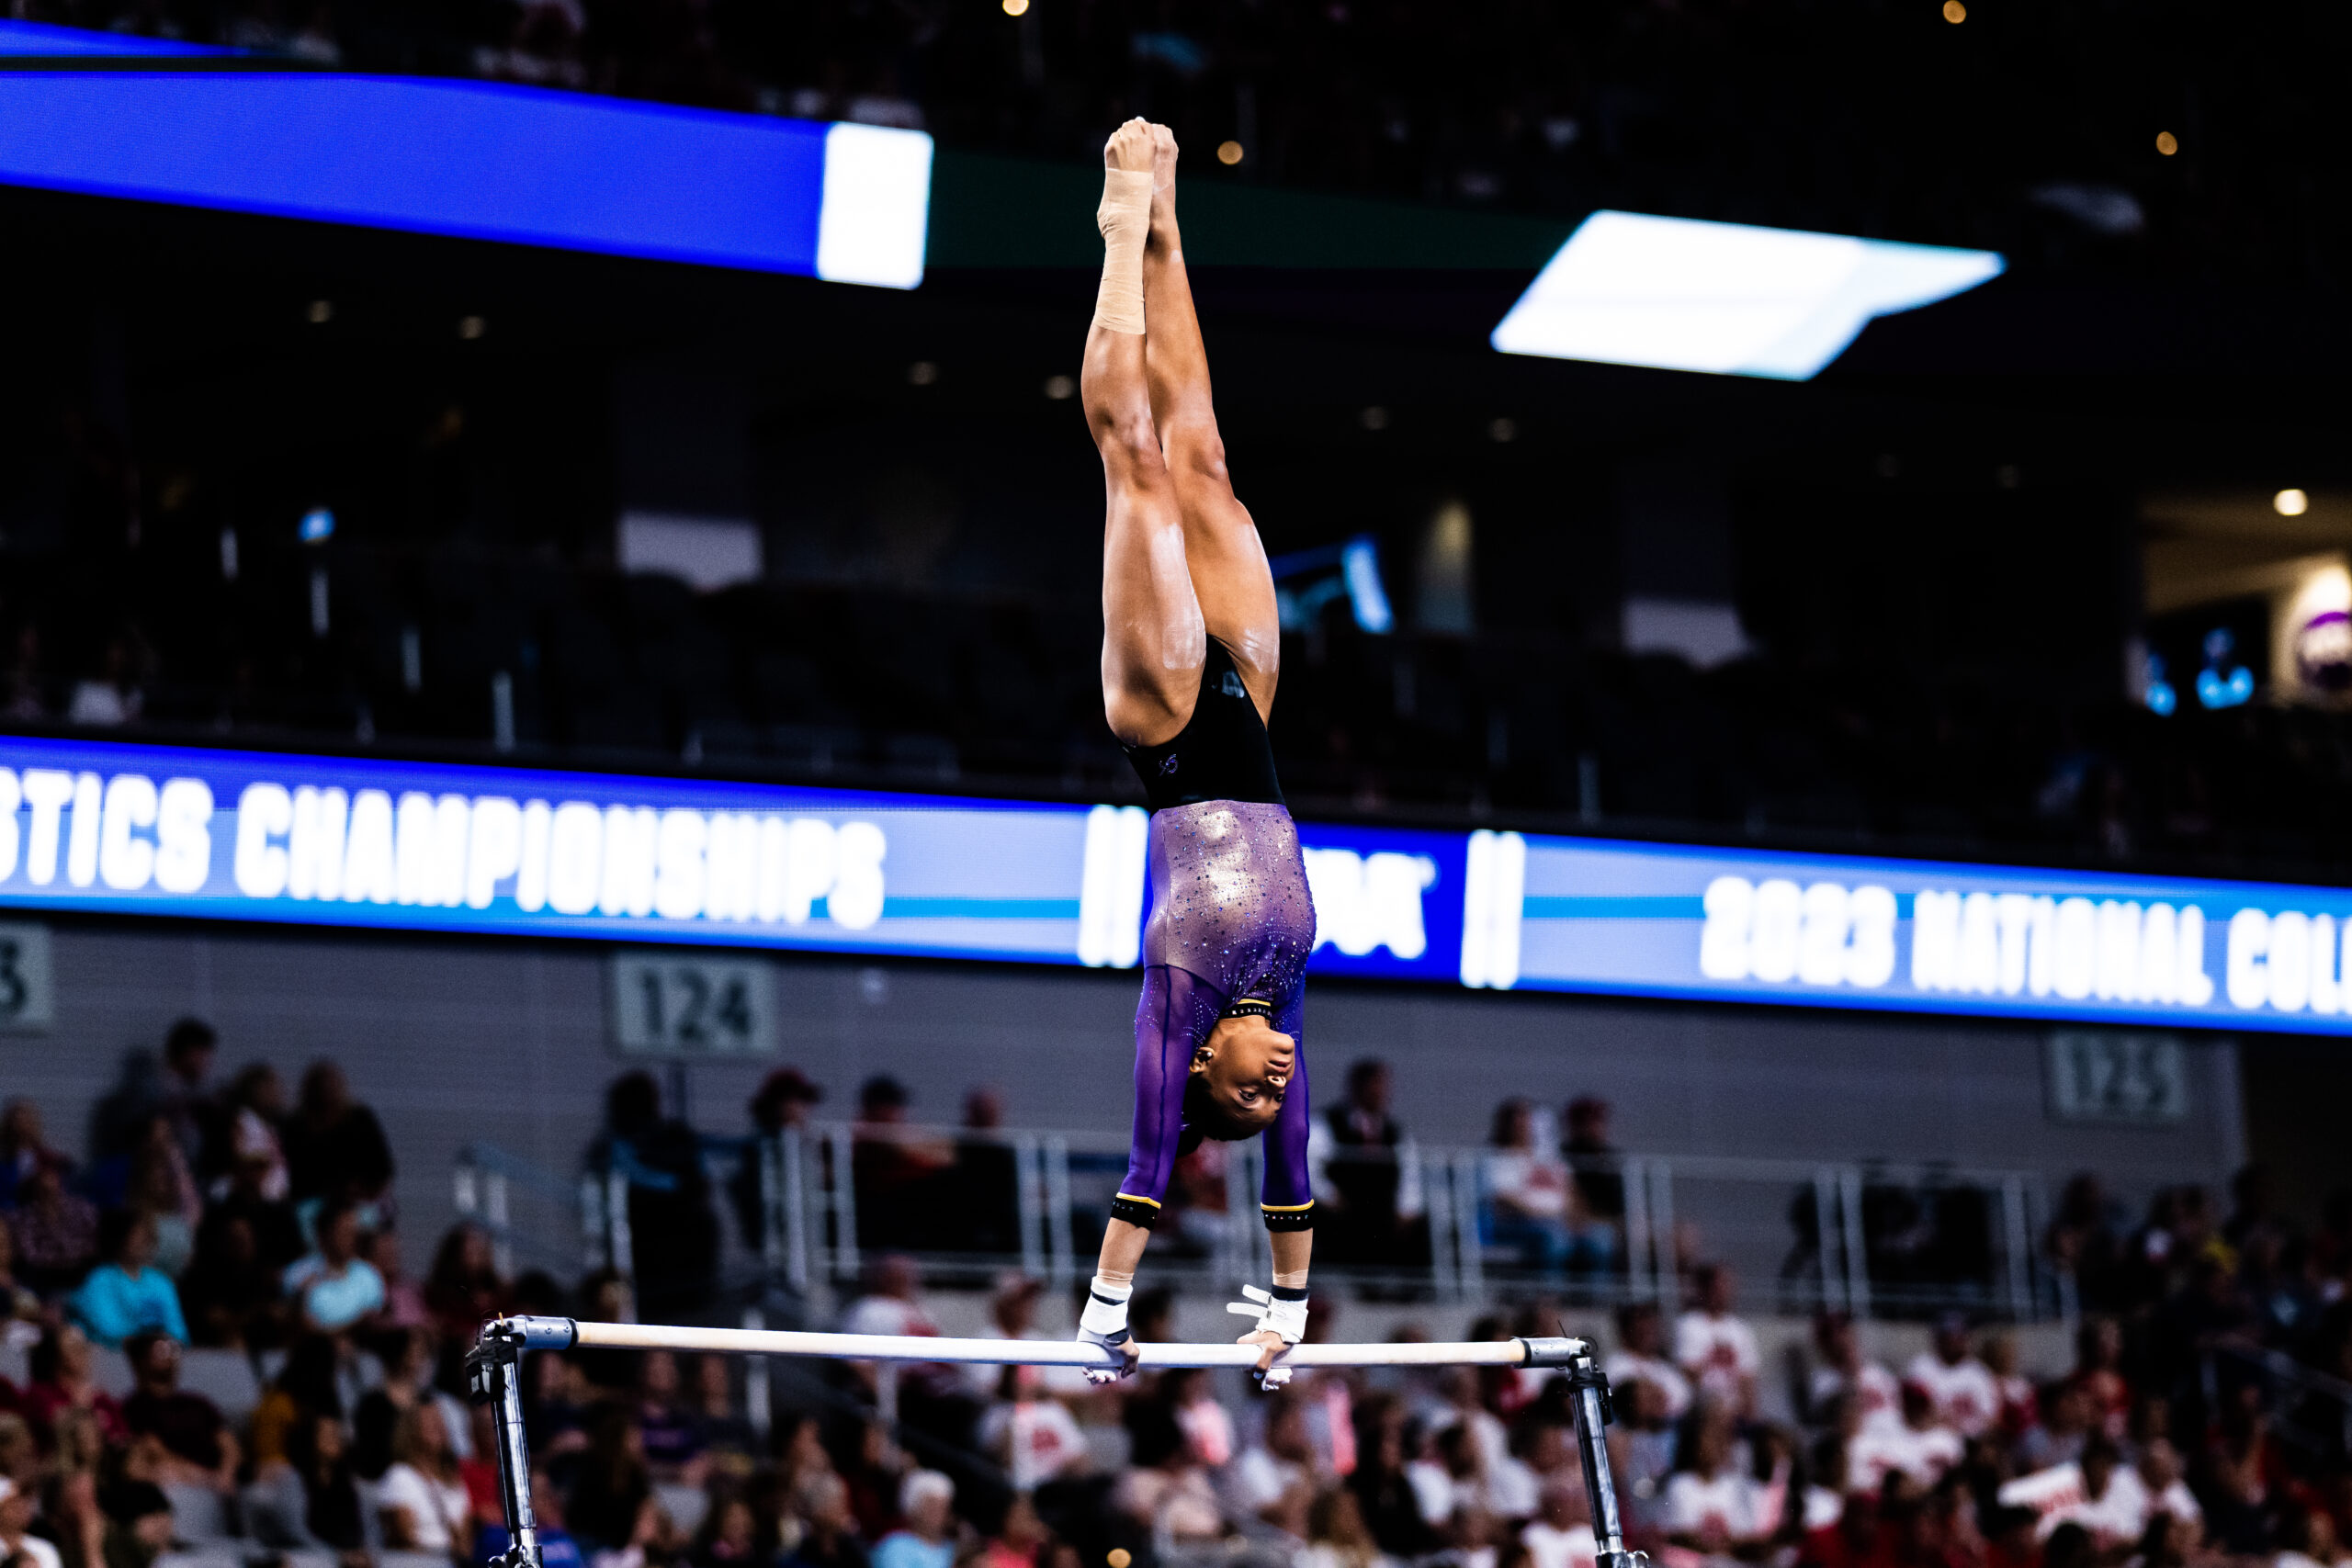 LSU's Haleigh Bryant on bars at the 2023 NCAA Women's Gymnastics Championships.